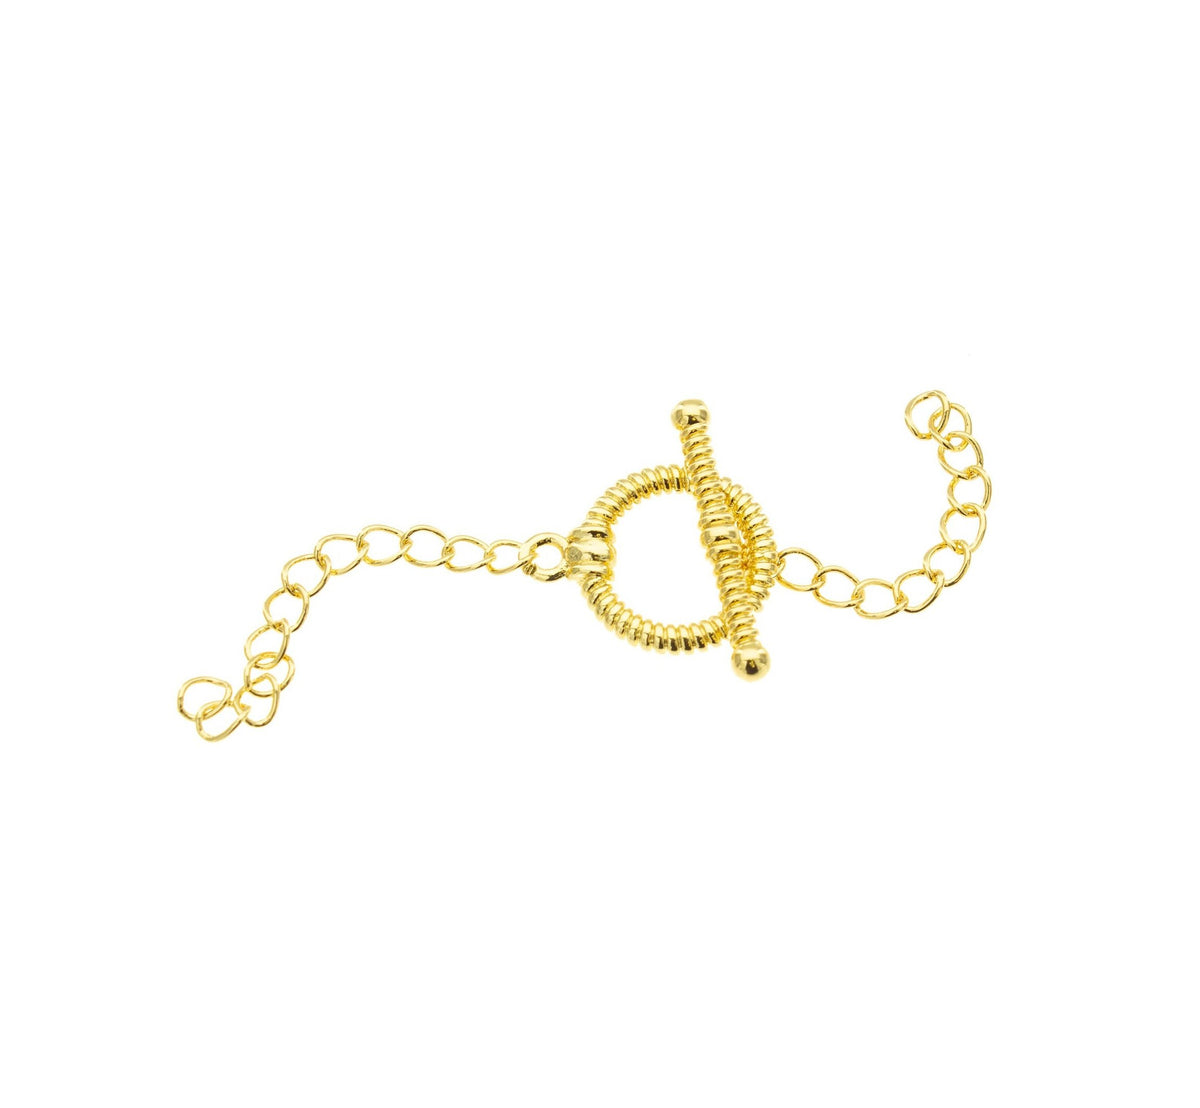 Extender Chain Toggle Clasp,Gold Circle Toggle Clasp With Extender Chain,Round Toggle Clasp For DIY Jewelry Making ,CLG006